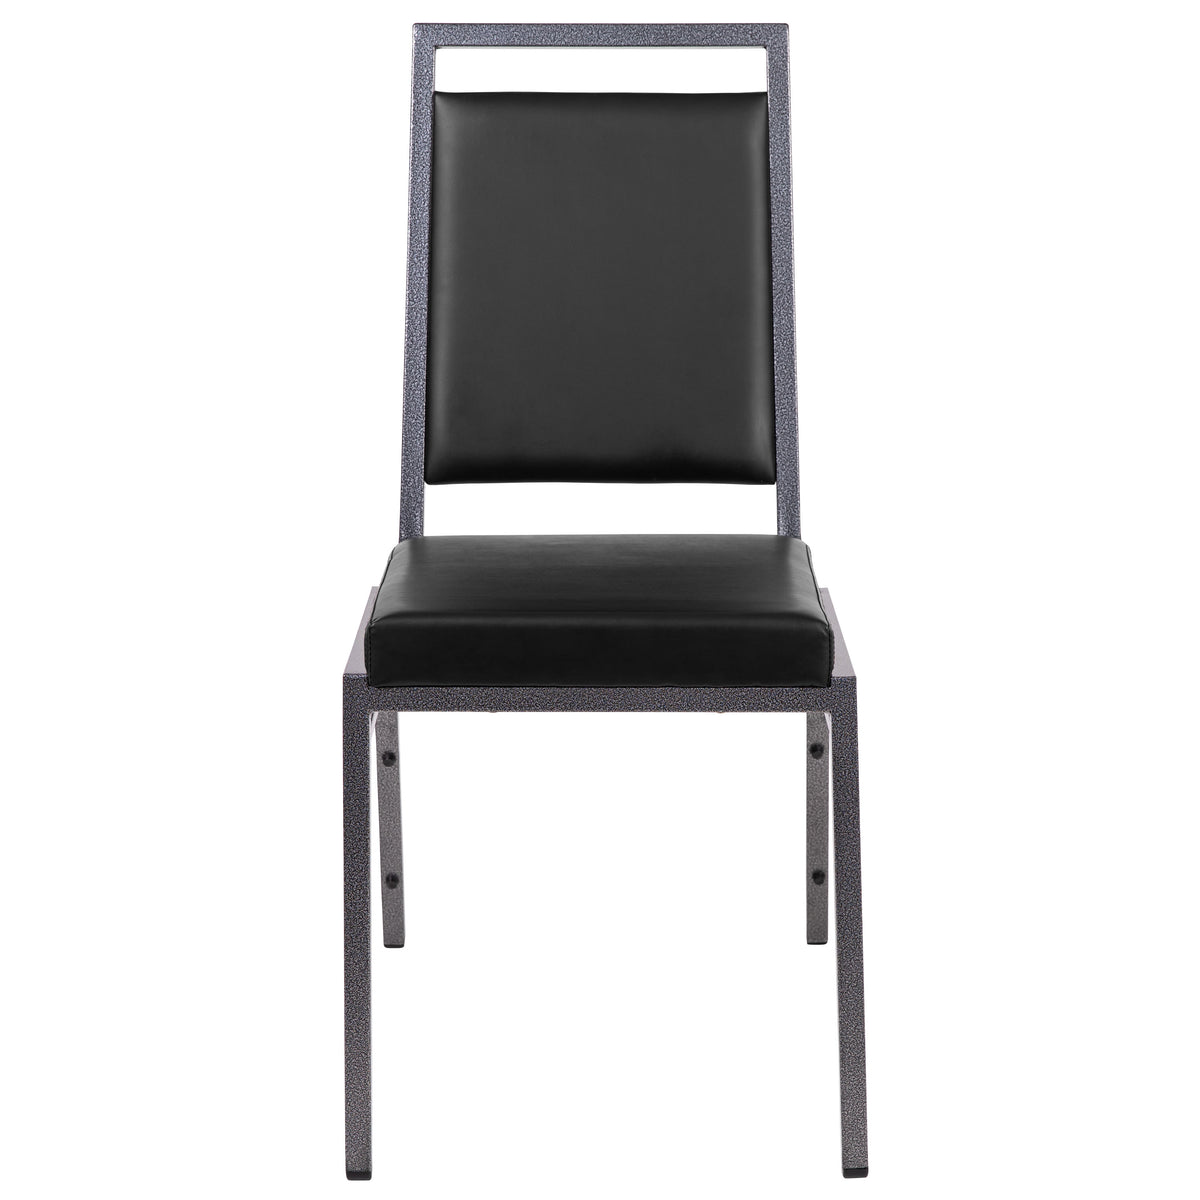 Black Vinyl/Silver Vein Frame |#| Square Back Banquet Stack Chair in Black Vinyl - Wedding Party Event Chair